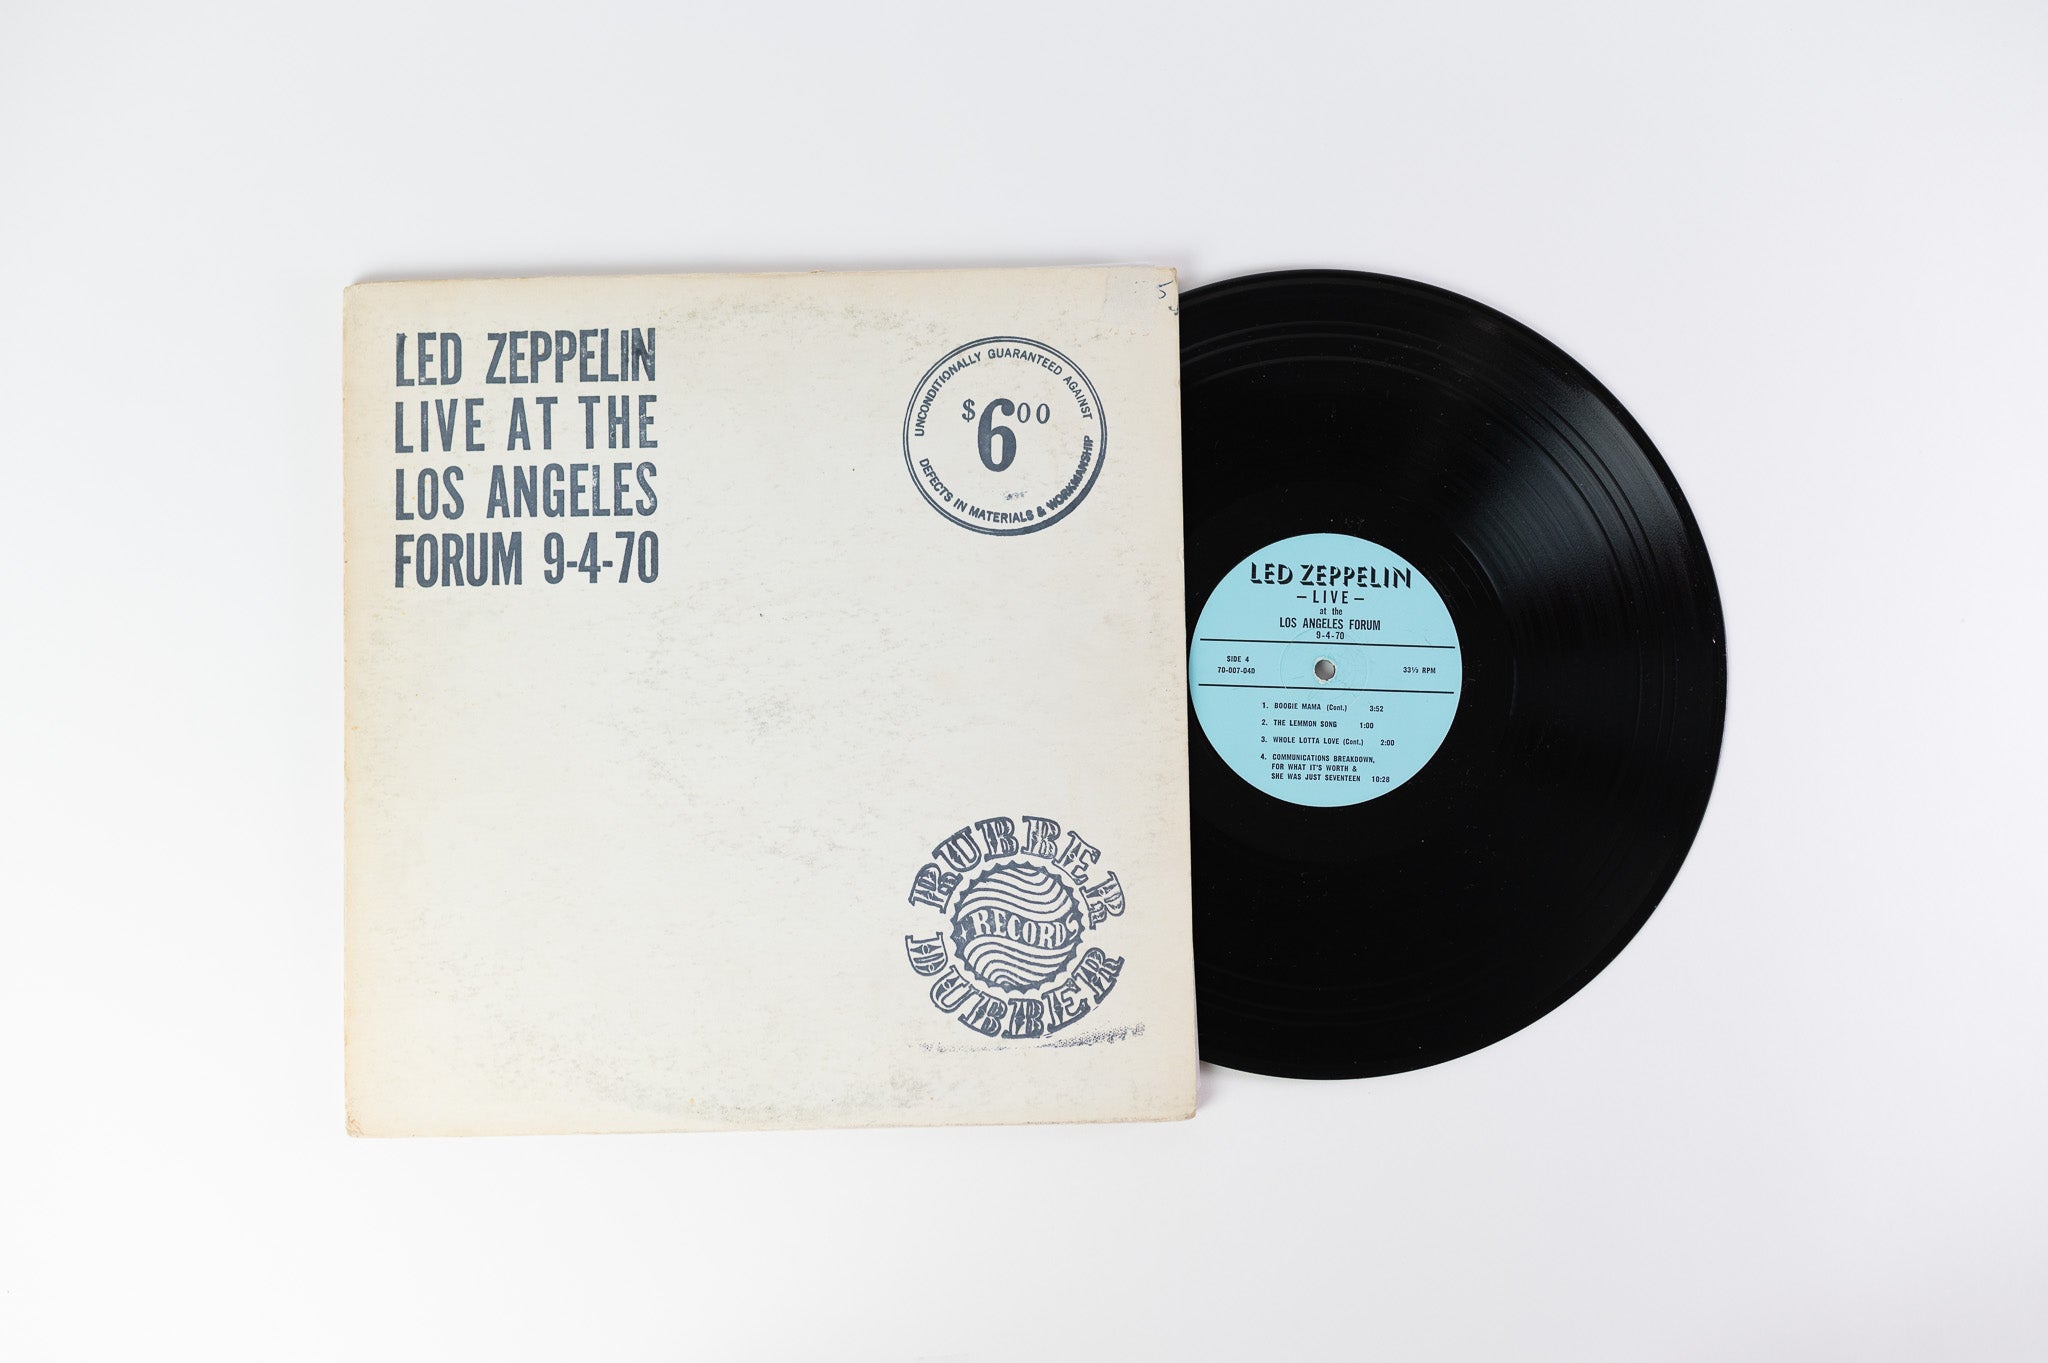 Led Zeppelin - Live At The Los Angeles Forum 9-4-70 Unofficial Release